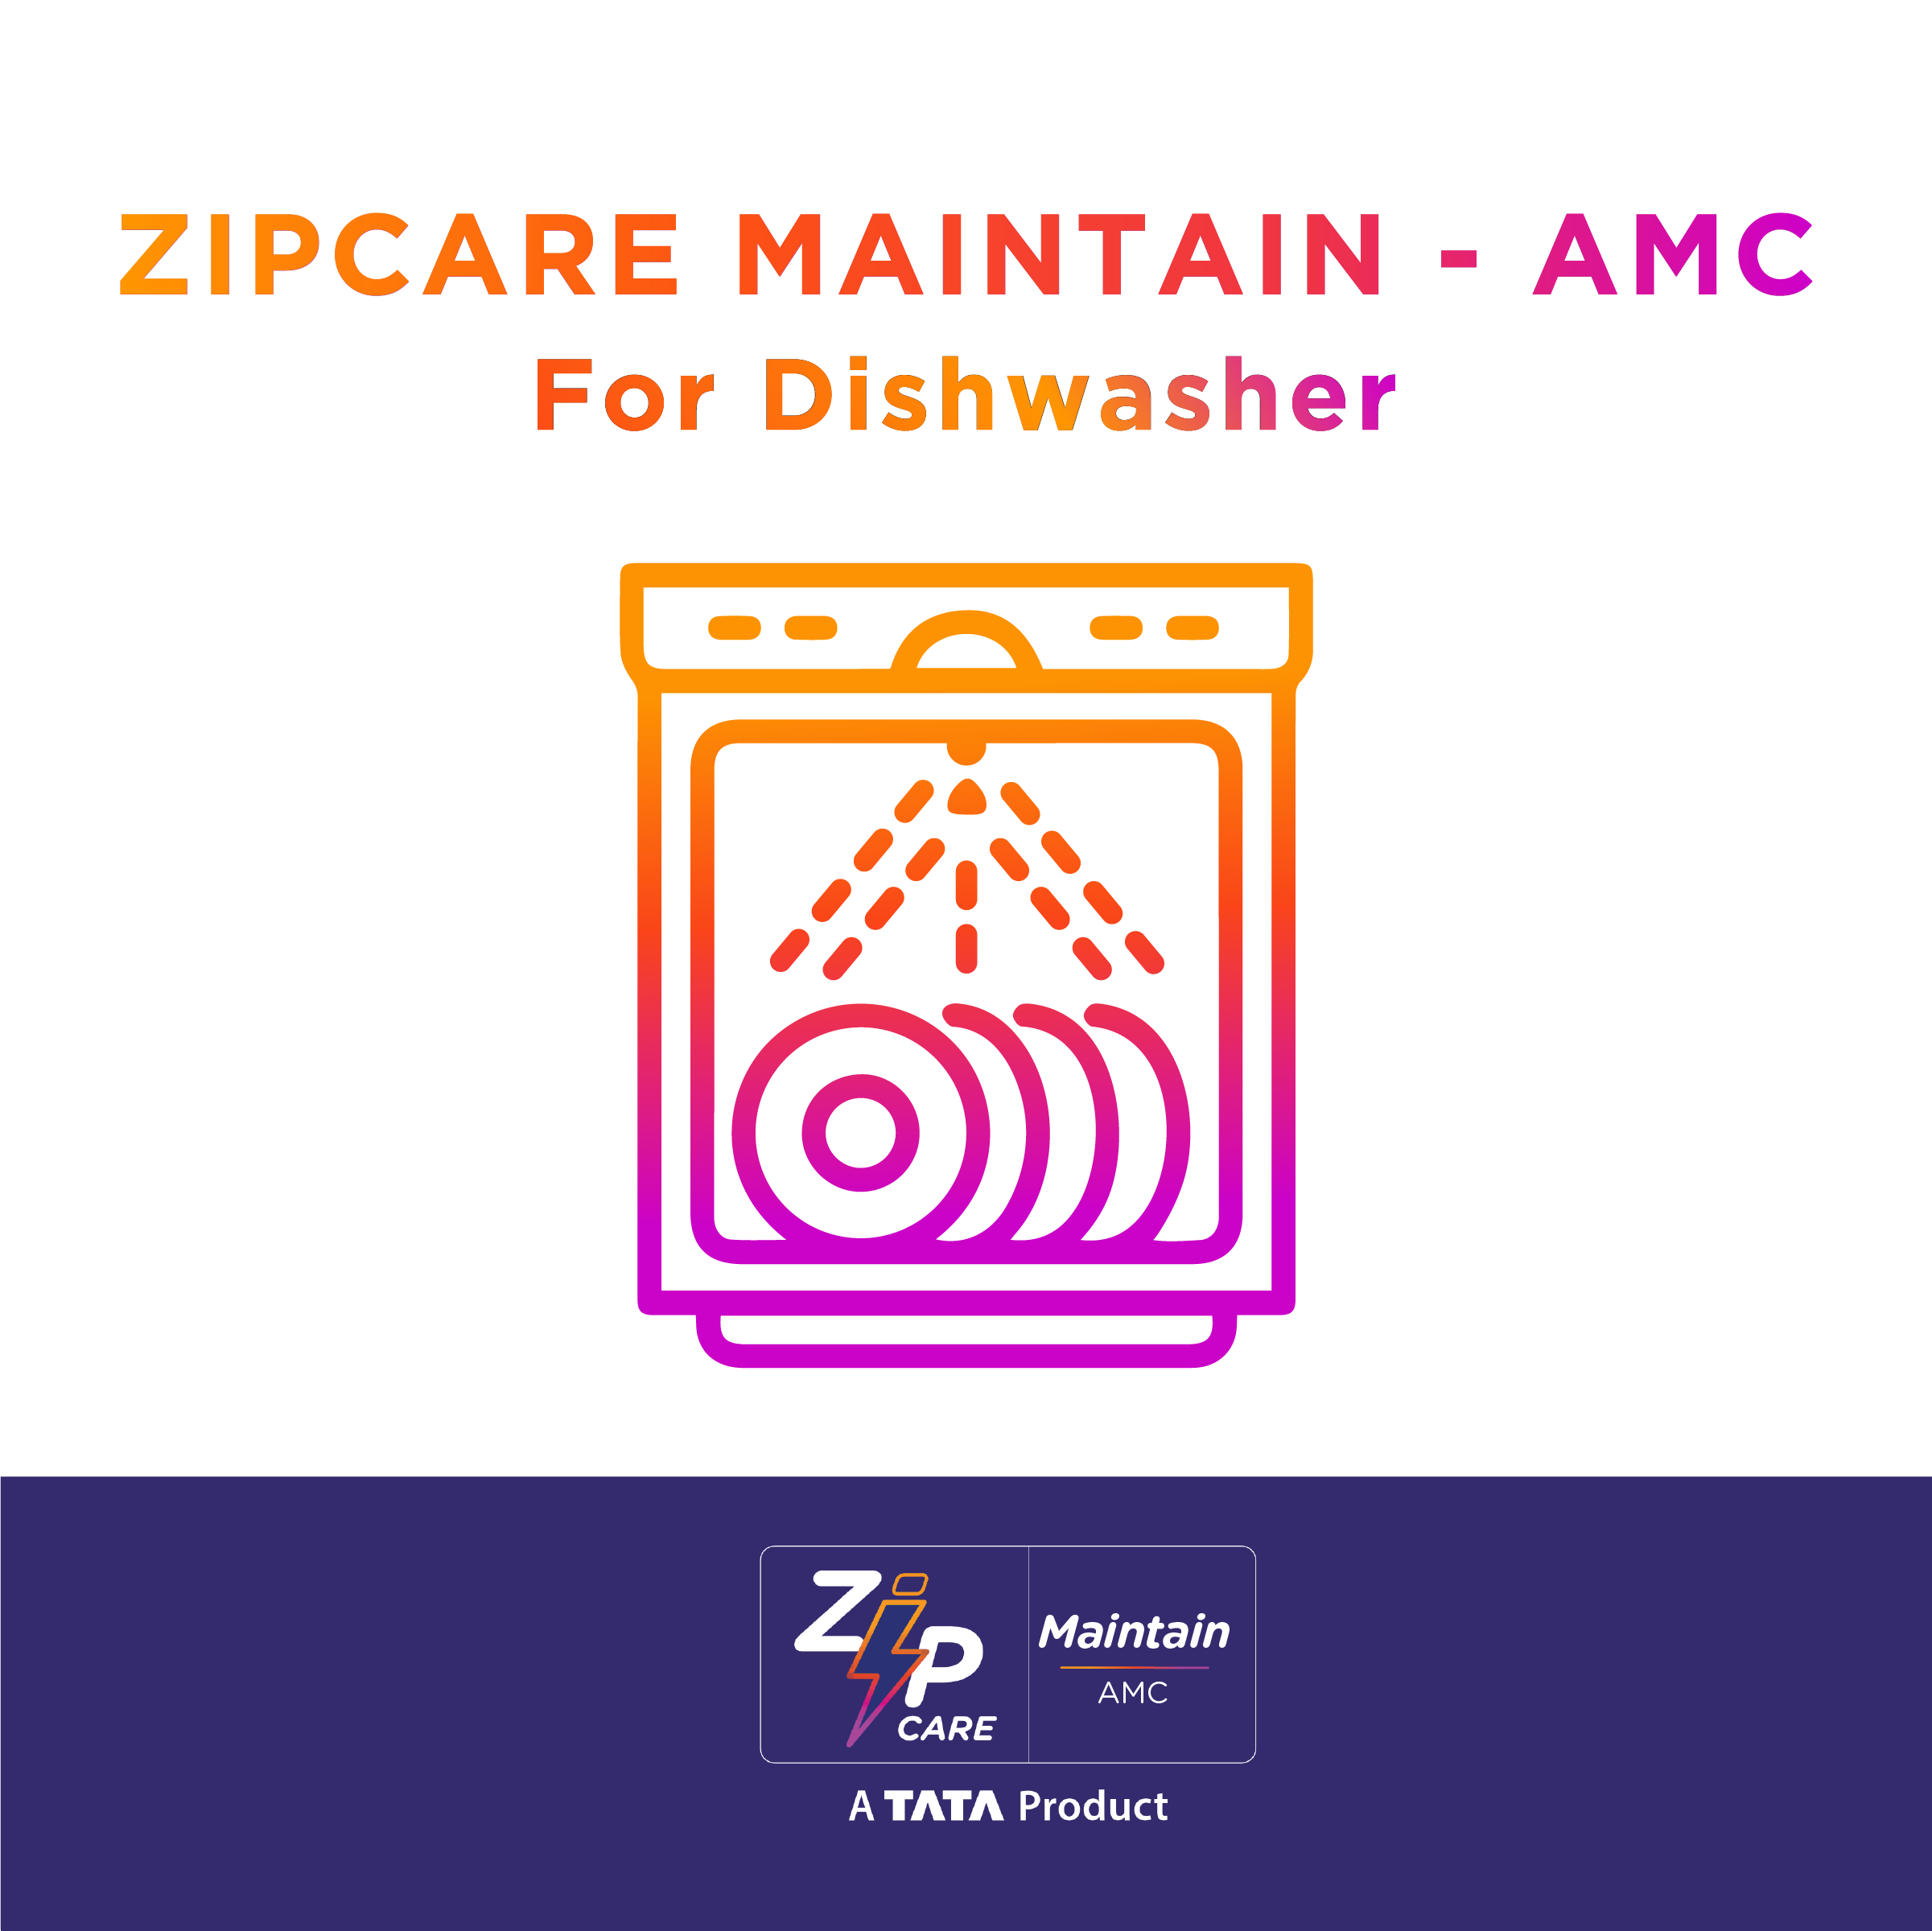 ZipCare Annual Maintenance Contract (AMC) for Dishwasher_1